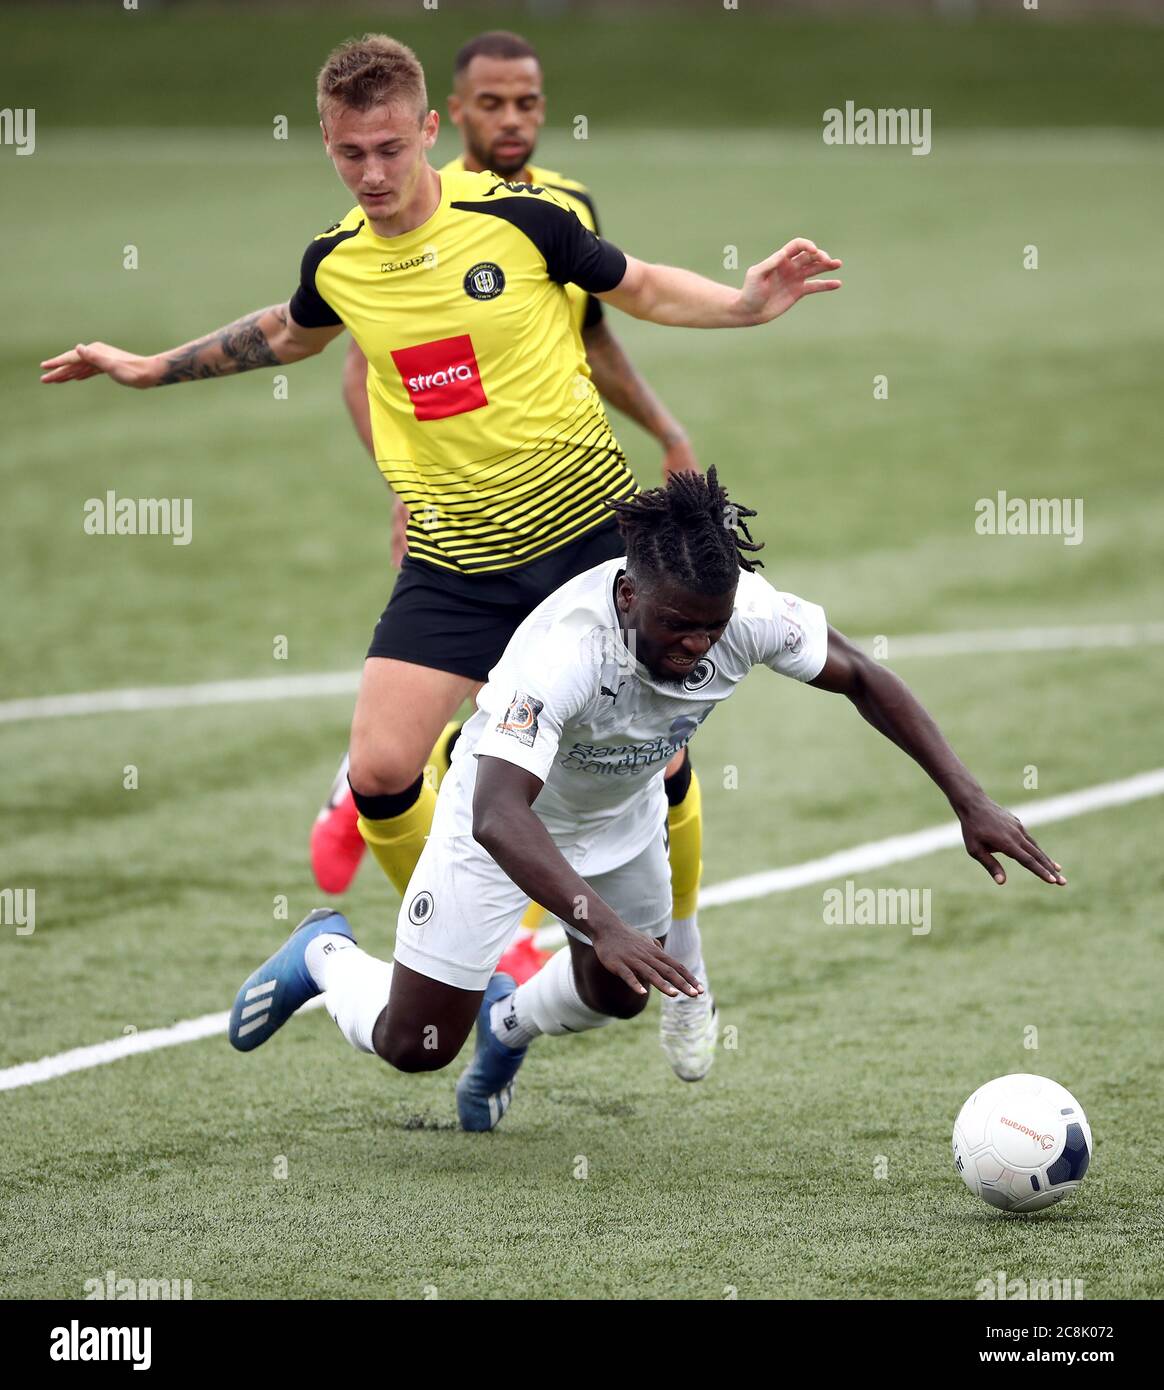 Boreham Wood's Kabongo Tshimanga goes down under the challenge from Harrogate Town's William Smith during the Vanarama National League play-off semi final match at CNG Stadium, Harrogate. Stock Photo